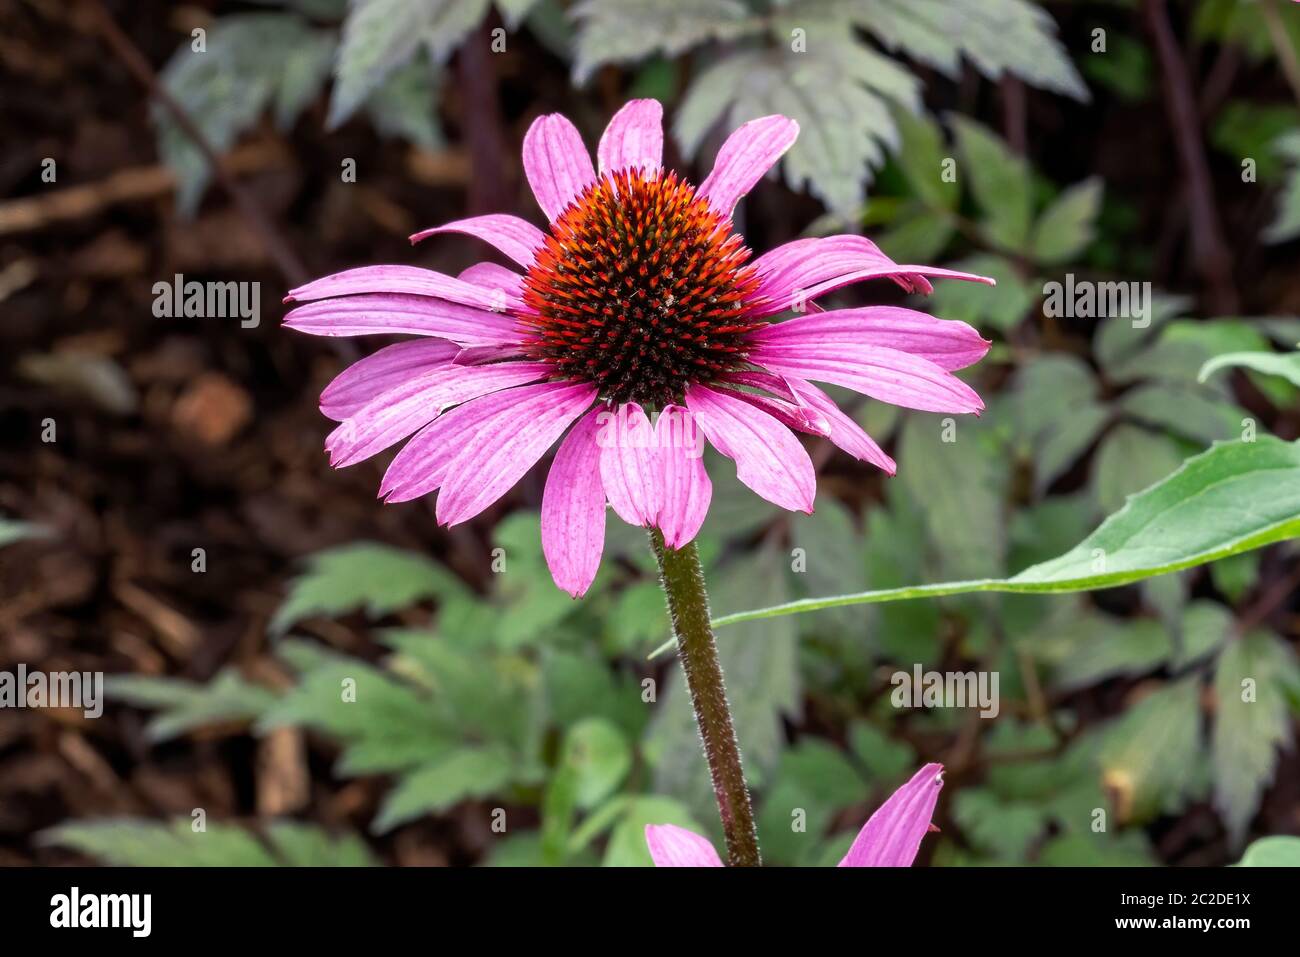 Echinacea purpurea 'Magnus' an herbaceous pink purple perennial summer autumn flower plant commonly known as coneflower Stock Photo